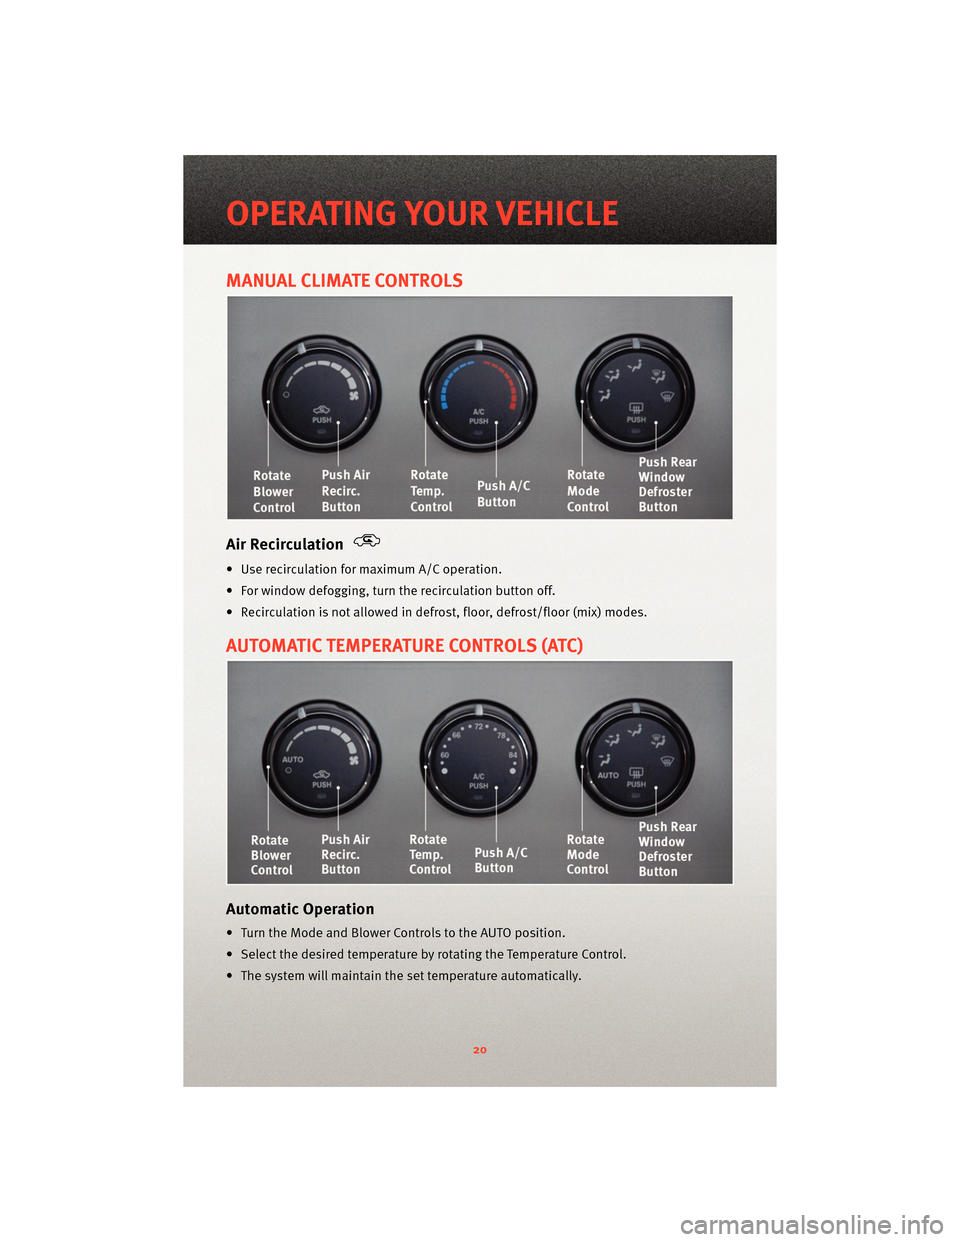 DODGE AVENGER 2010 2.G User Guide MANUAL CLIMATE CONTROLS
Air Recirculation
• Use recirculation for maximum A/C operation.
• For window defogging, turnthe recirculation button off.
• Recirculation is not allowed in defrost, floo